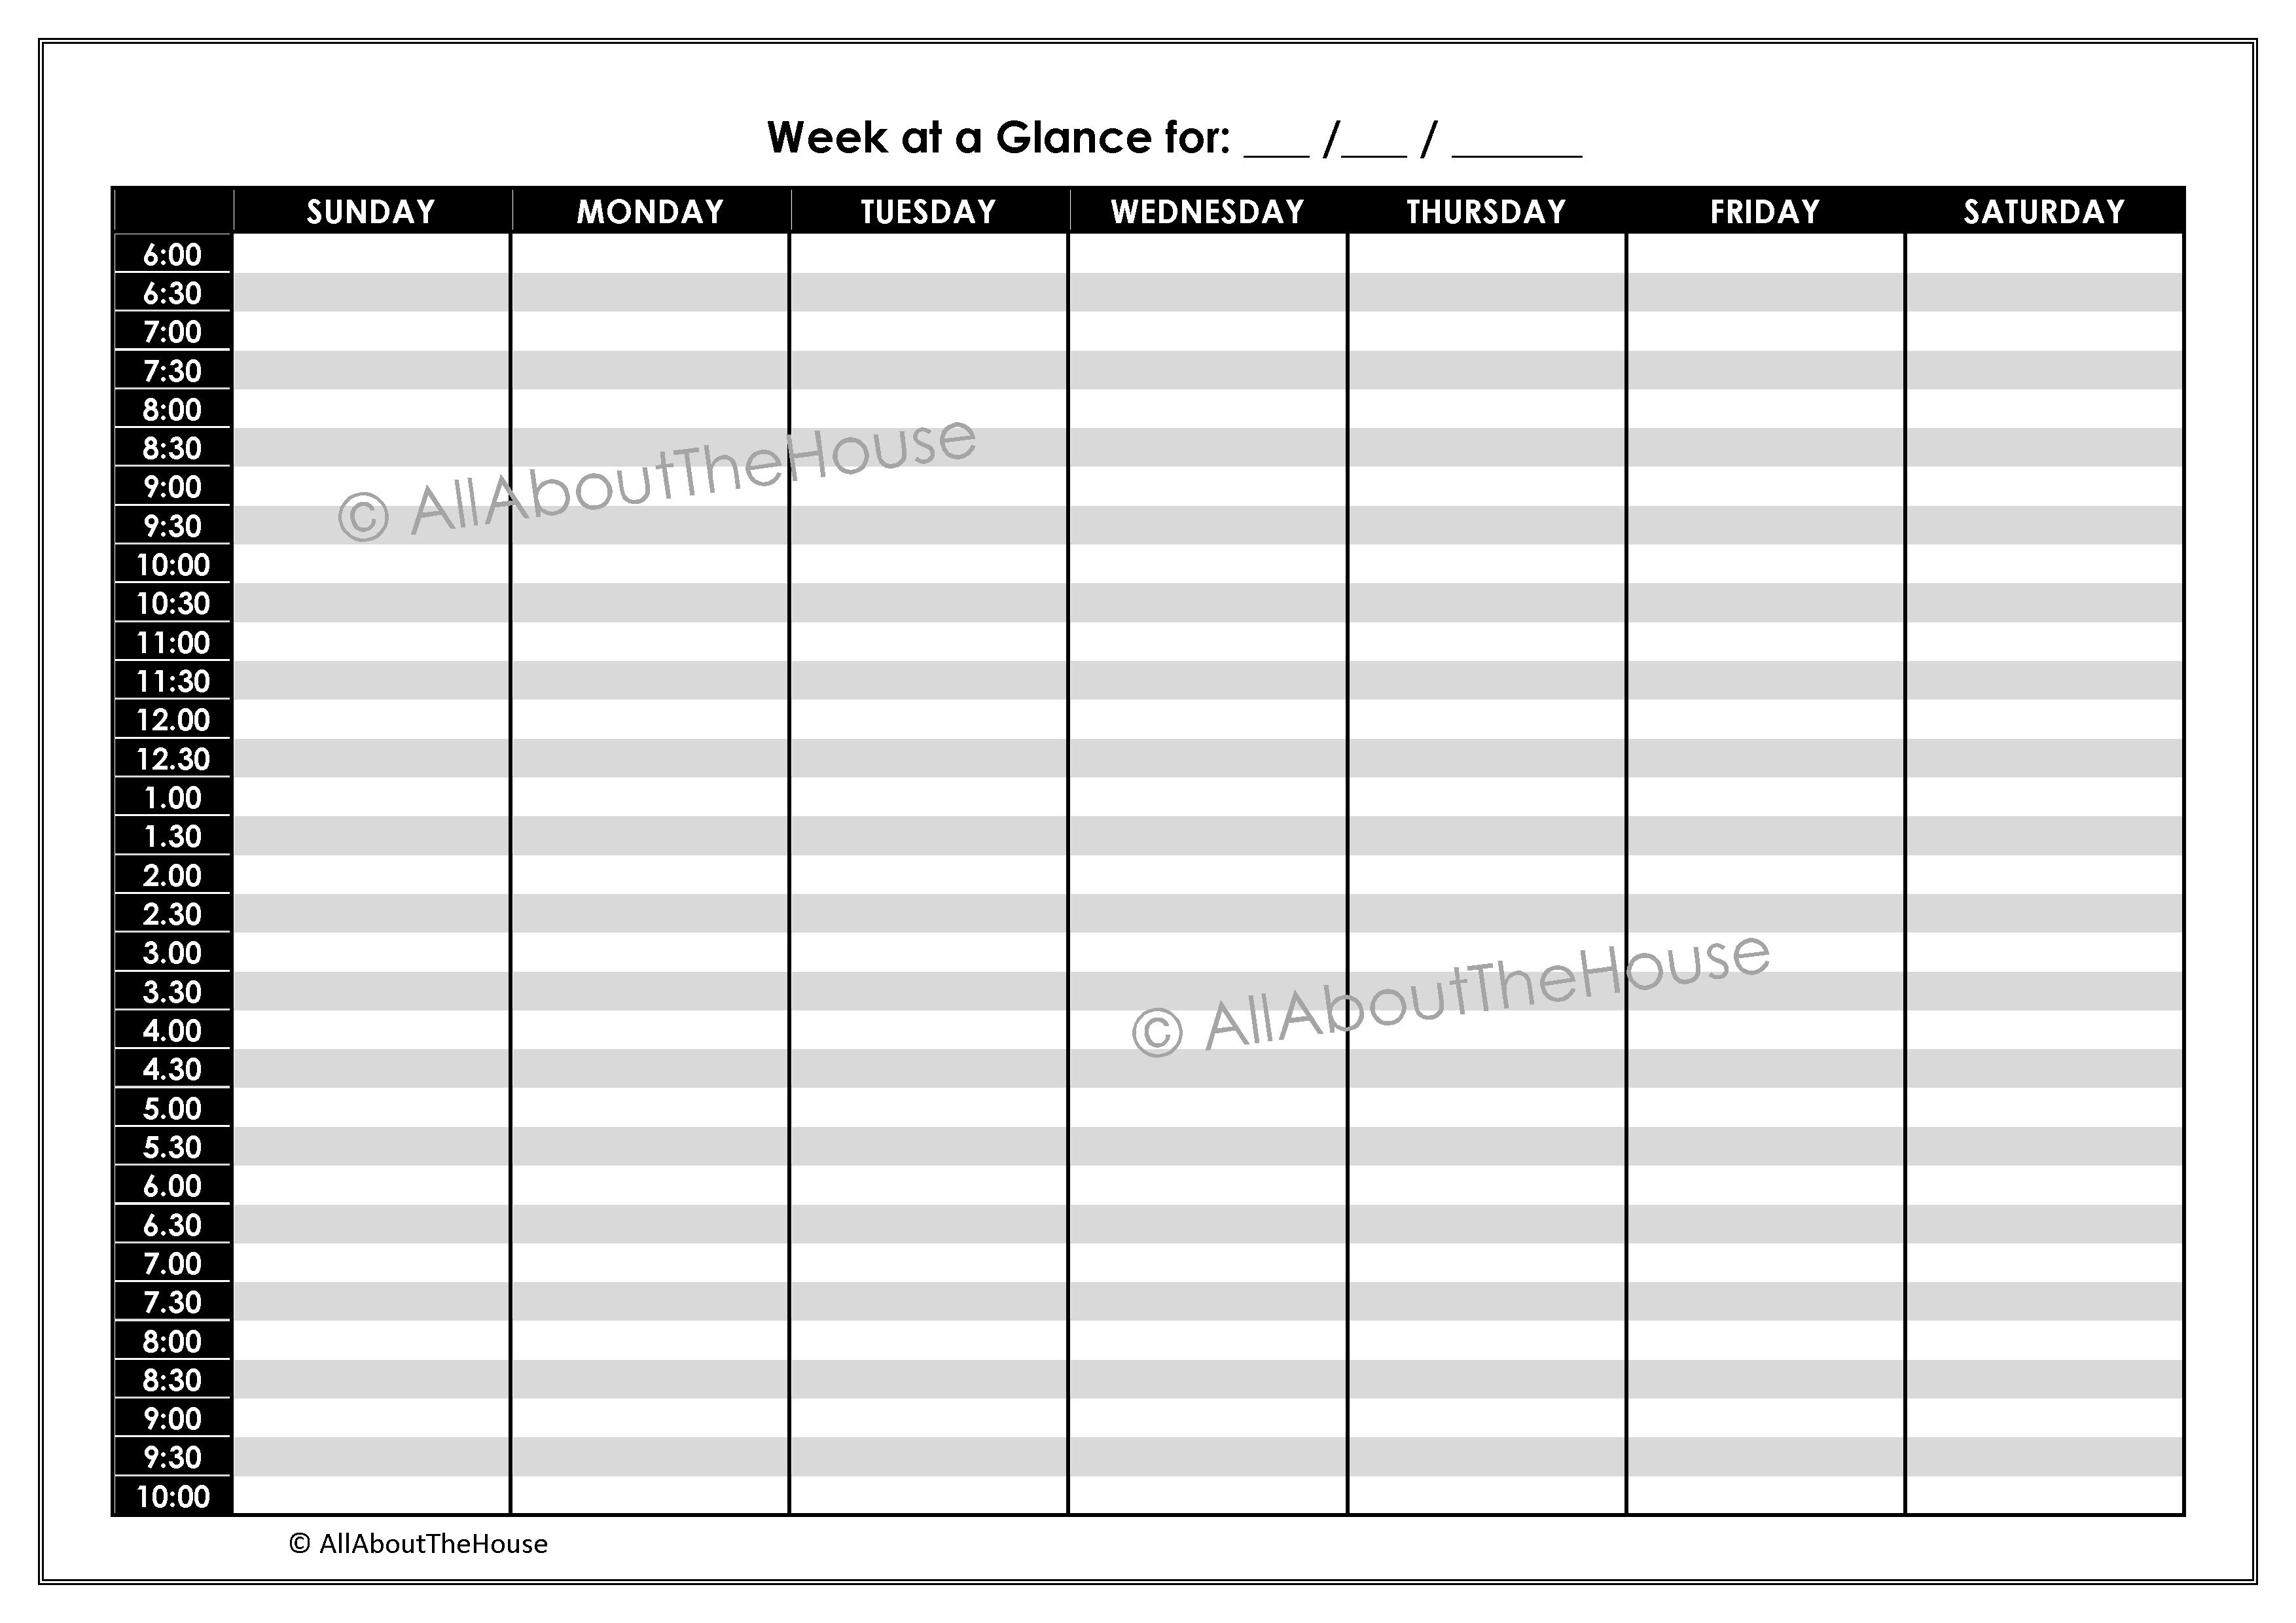 Printable Weekly Calendar With Time Slots That Are Trust throughout Printable Weekly Calendar With Time Slots